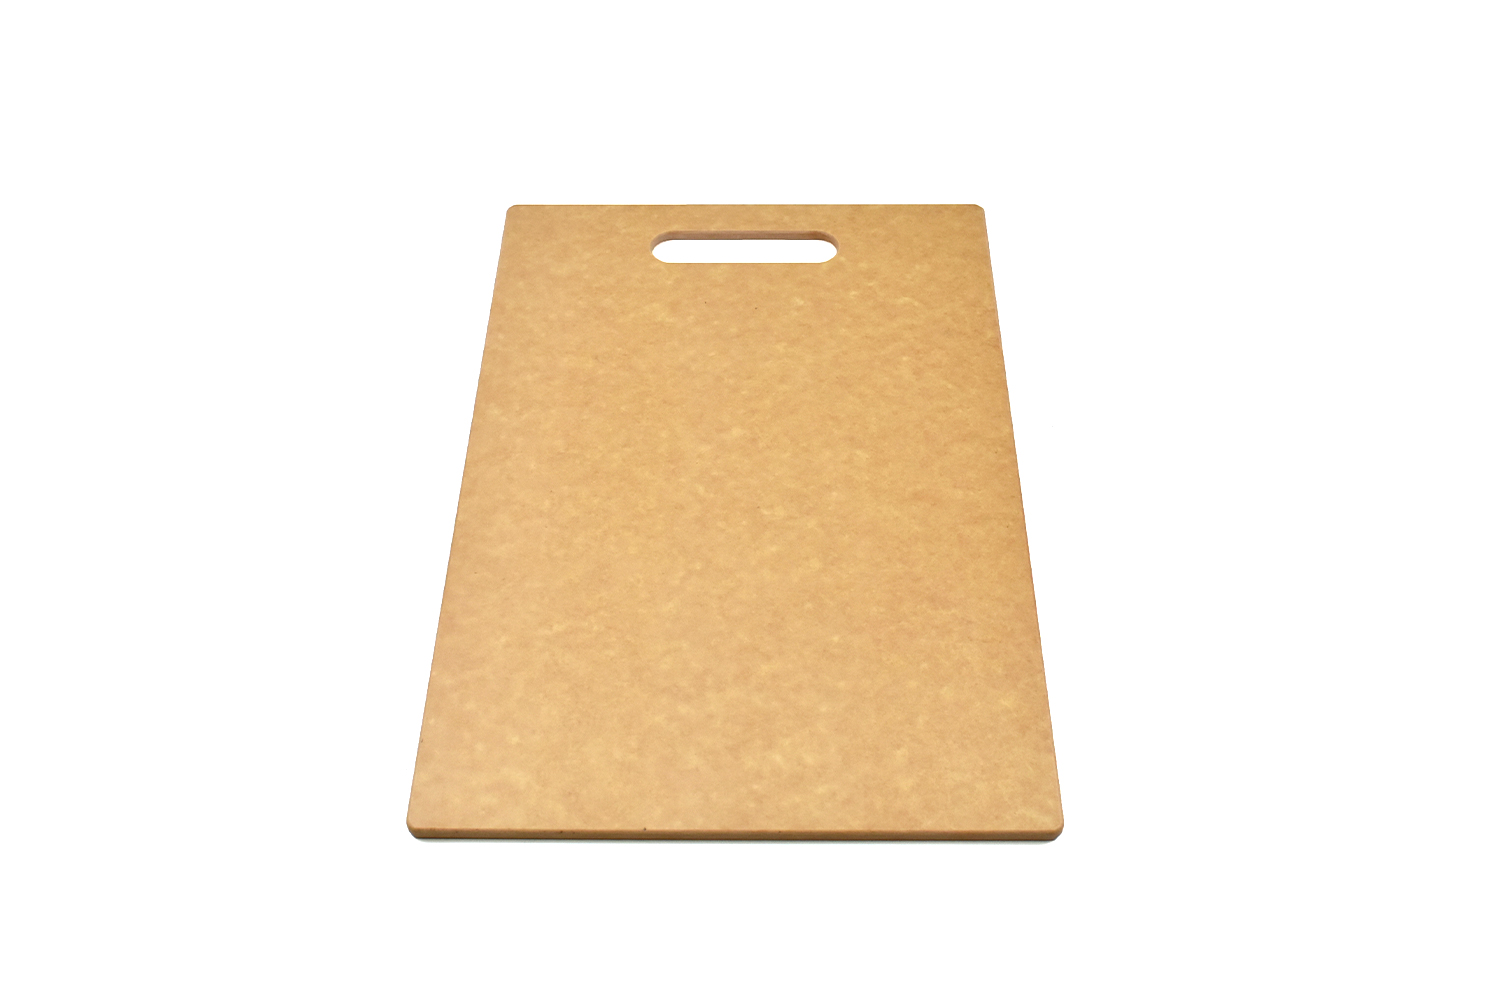 Richlite cutting board, paper-composite that is durable & water